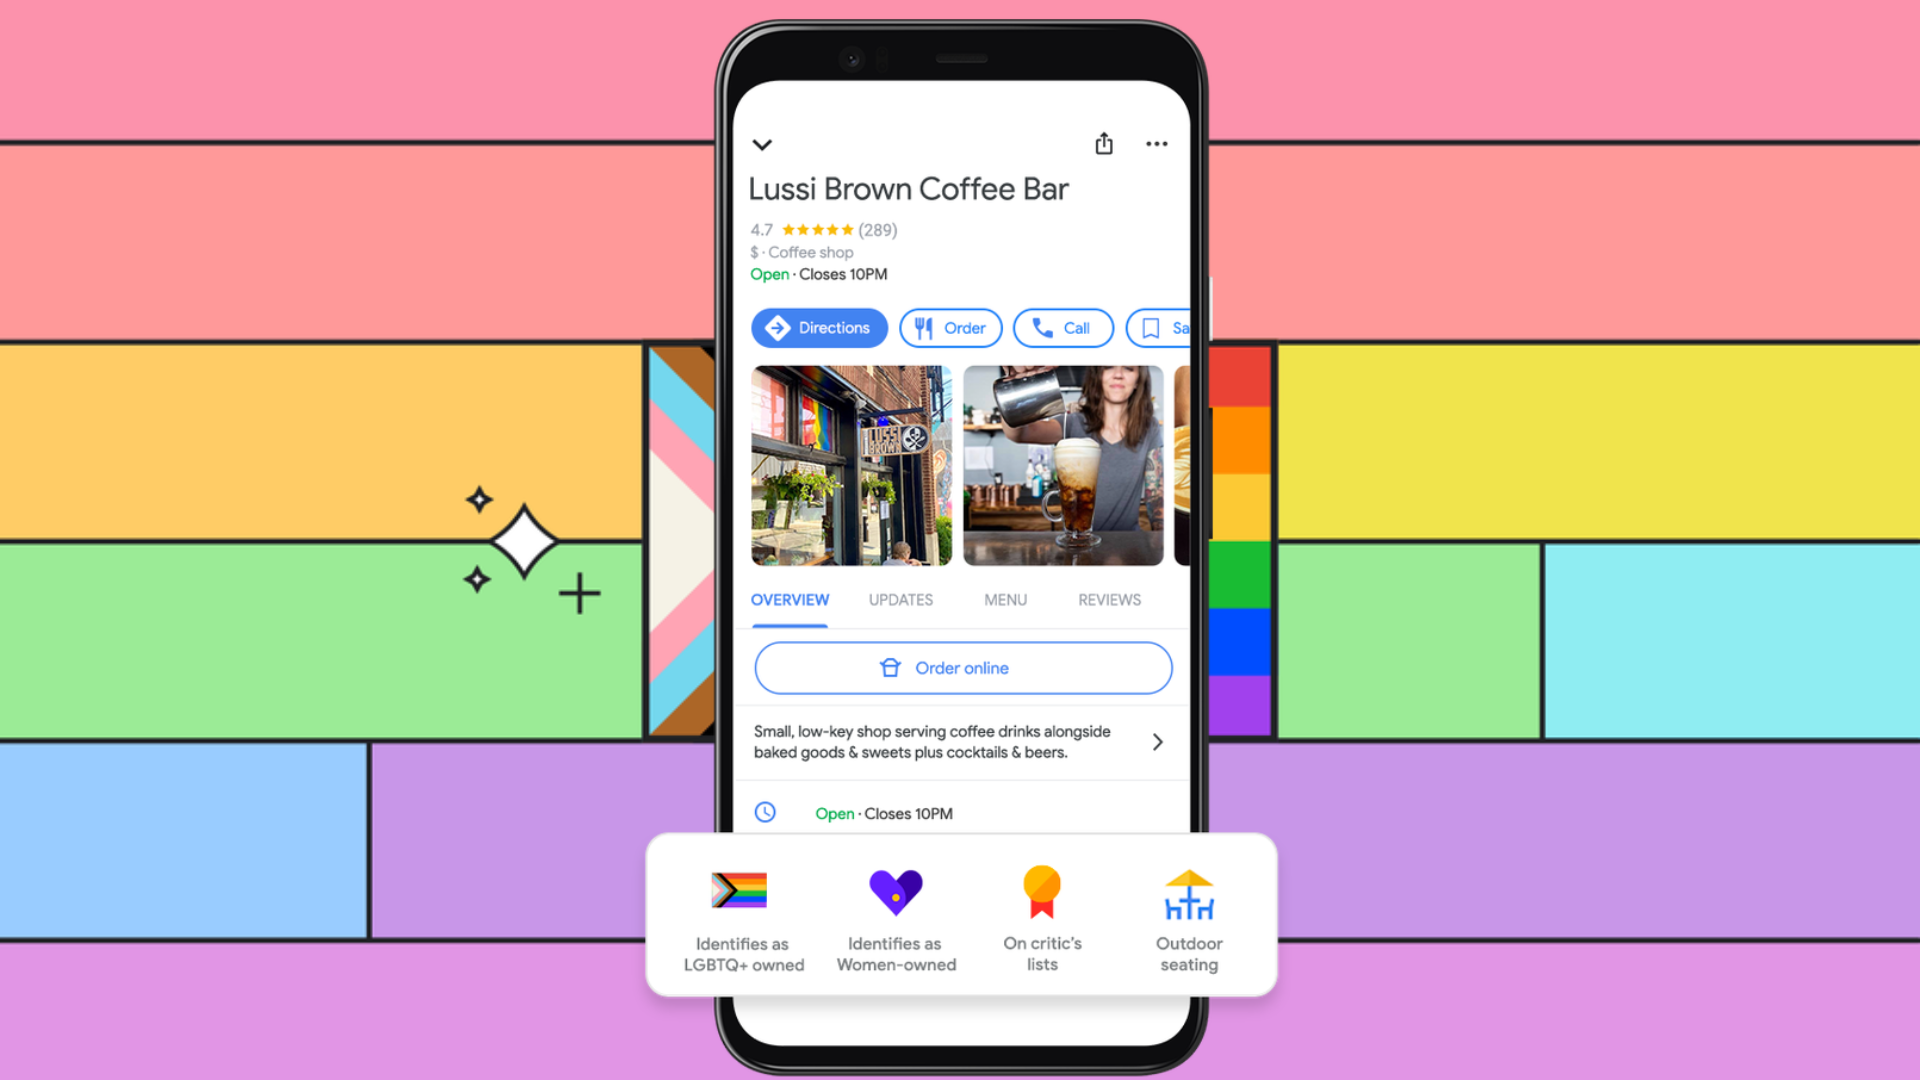 Business using new LGBTQ+ ownership tag on Google Maps